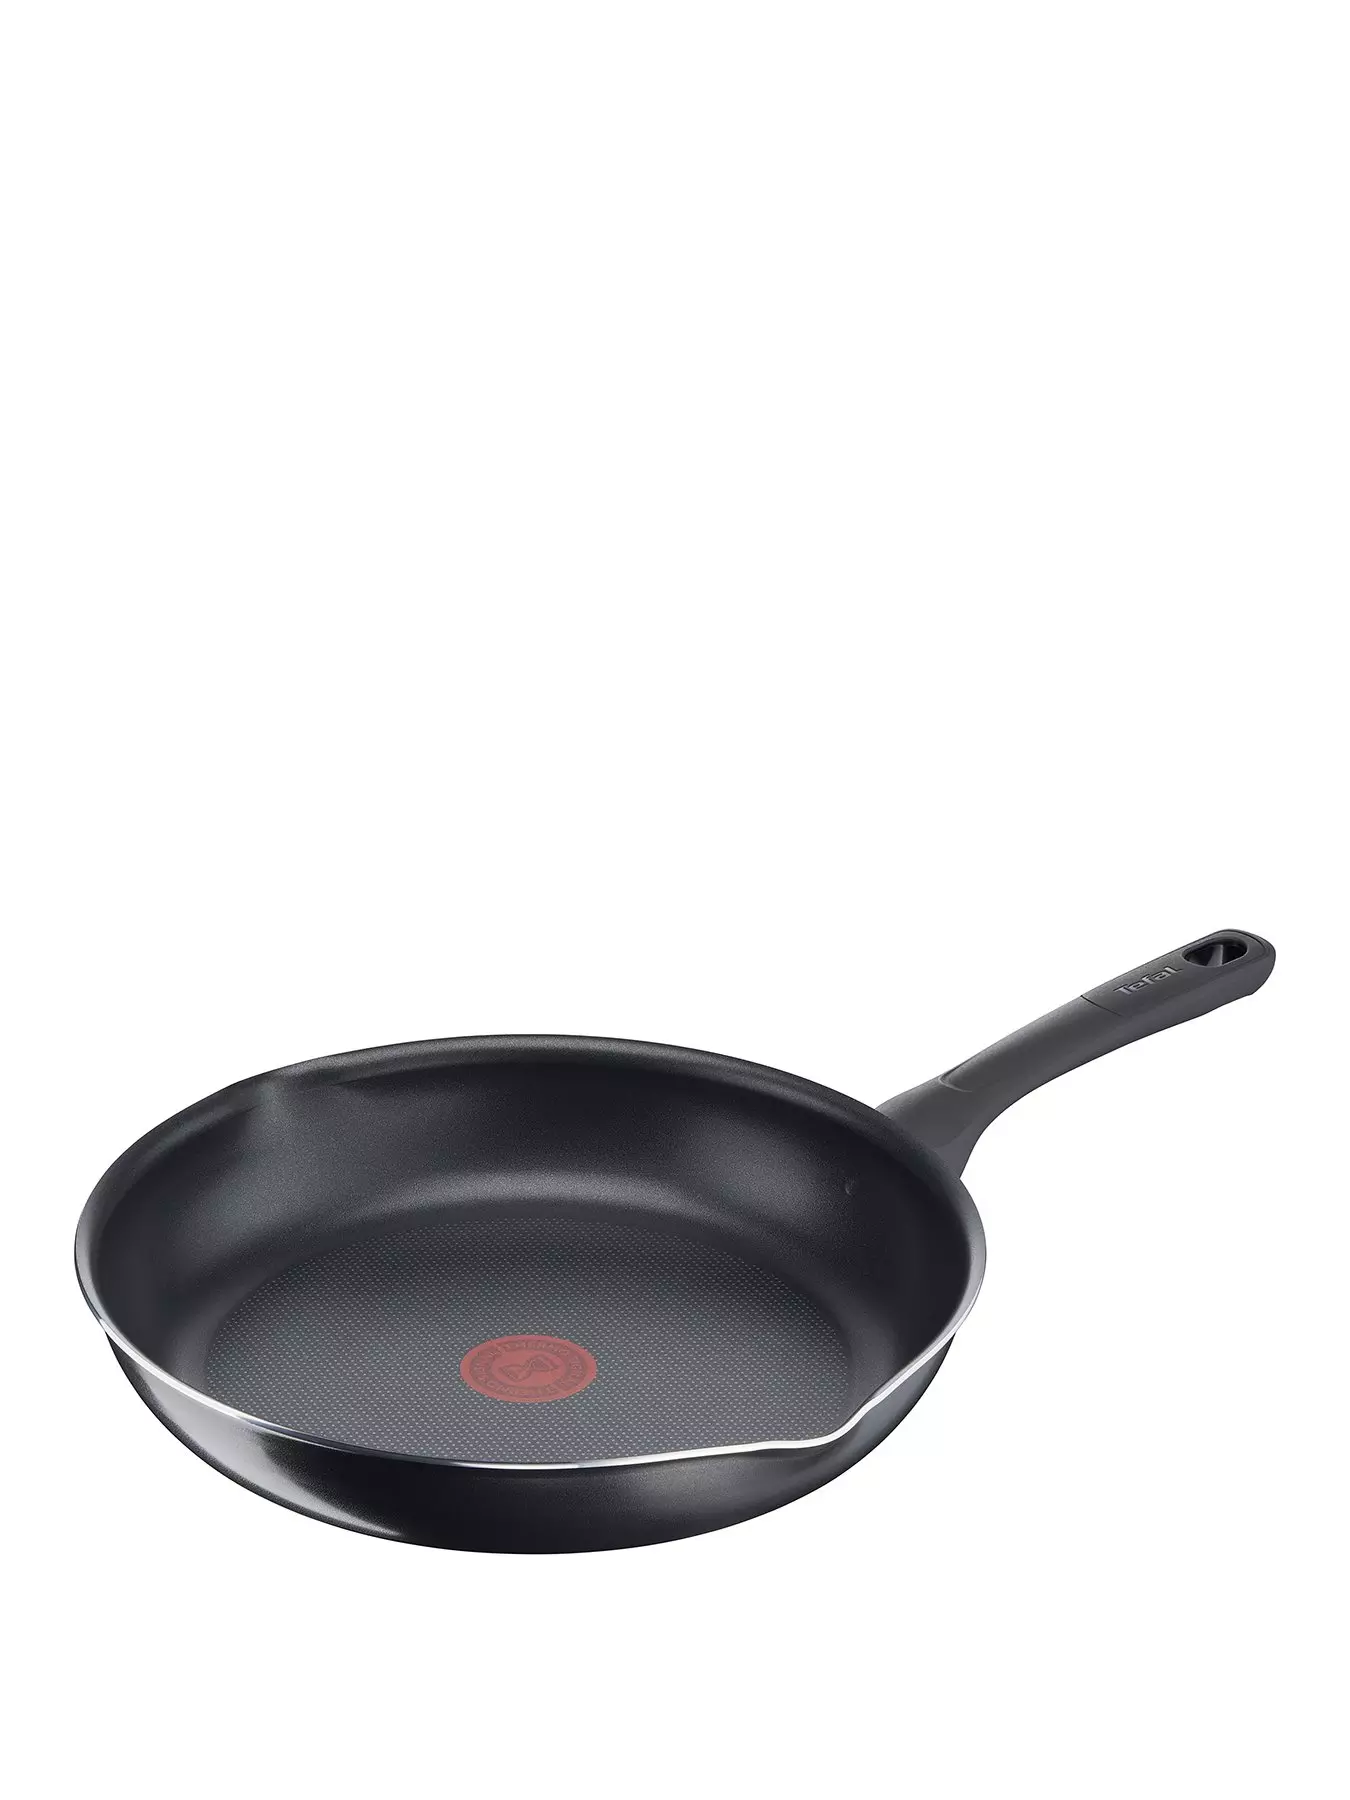  Ninja ZEROSTICK Stainless Steel Cookware 30cm Frying Pan, Long  Lasting, Non-Stick, Induction Compatible Frying Pan, Oven Safe to 260°C,  Cast Stainless Steel Handle C60030UK : Home & Kitchen